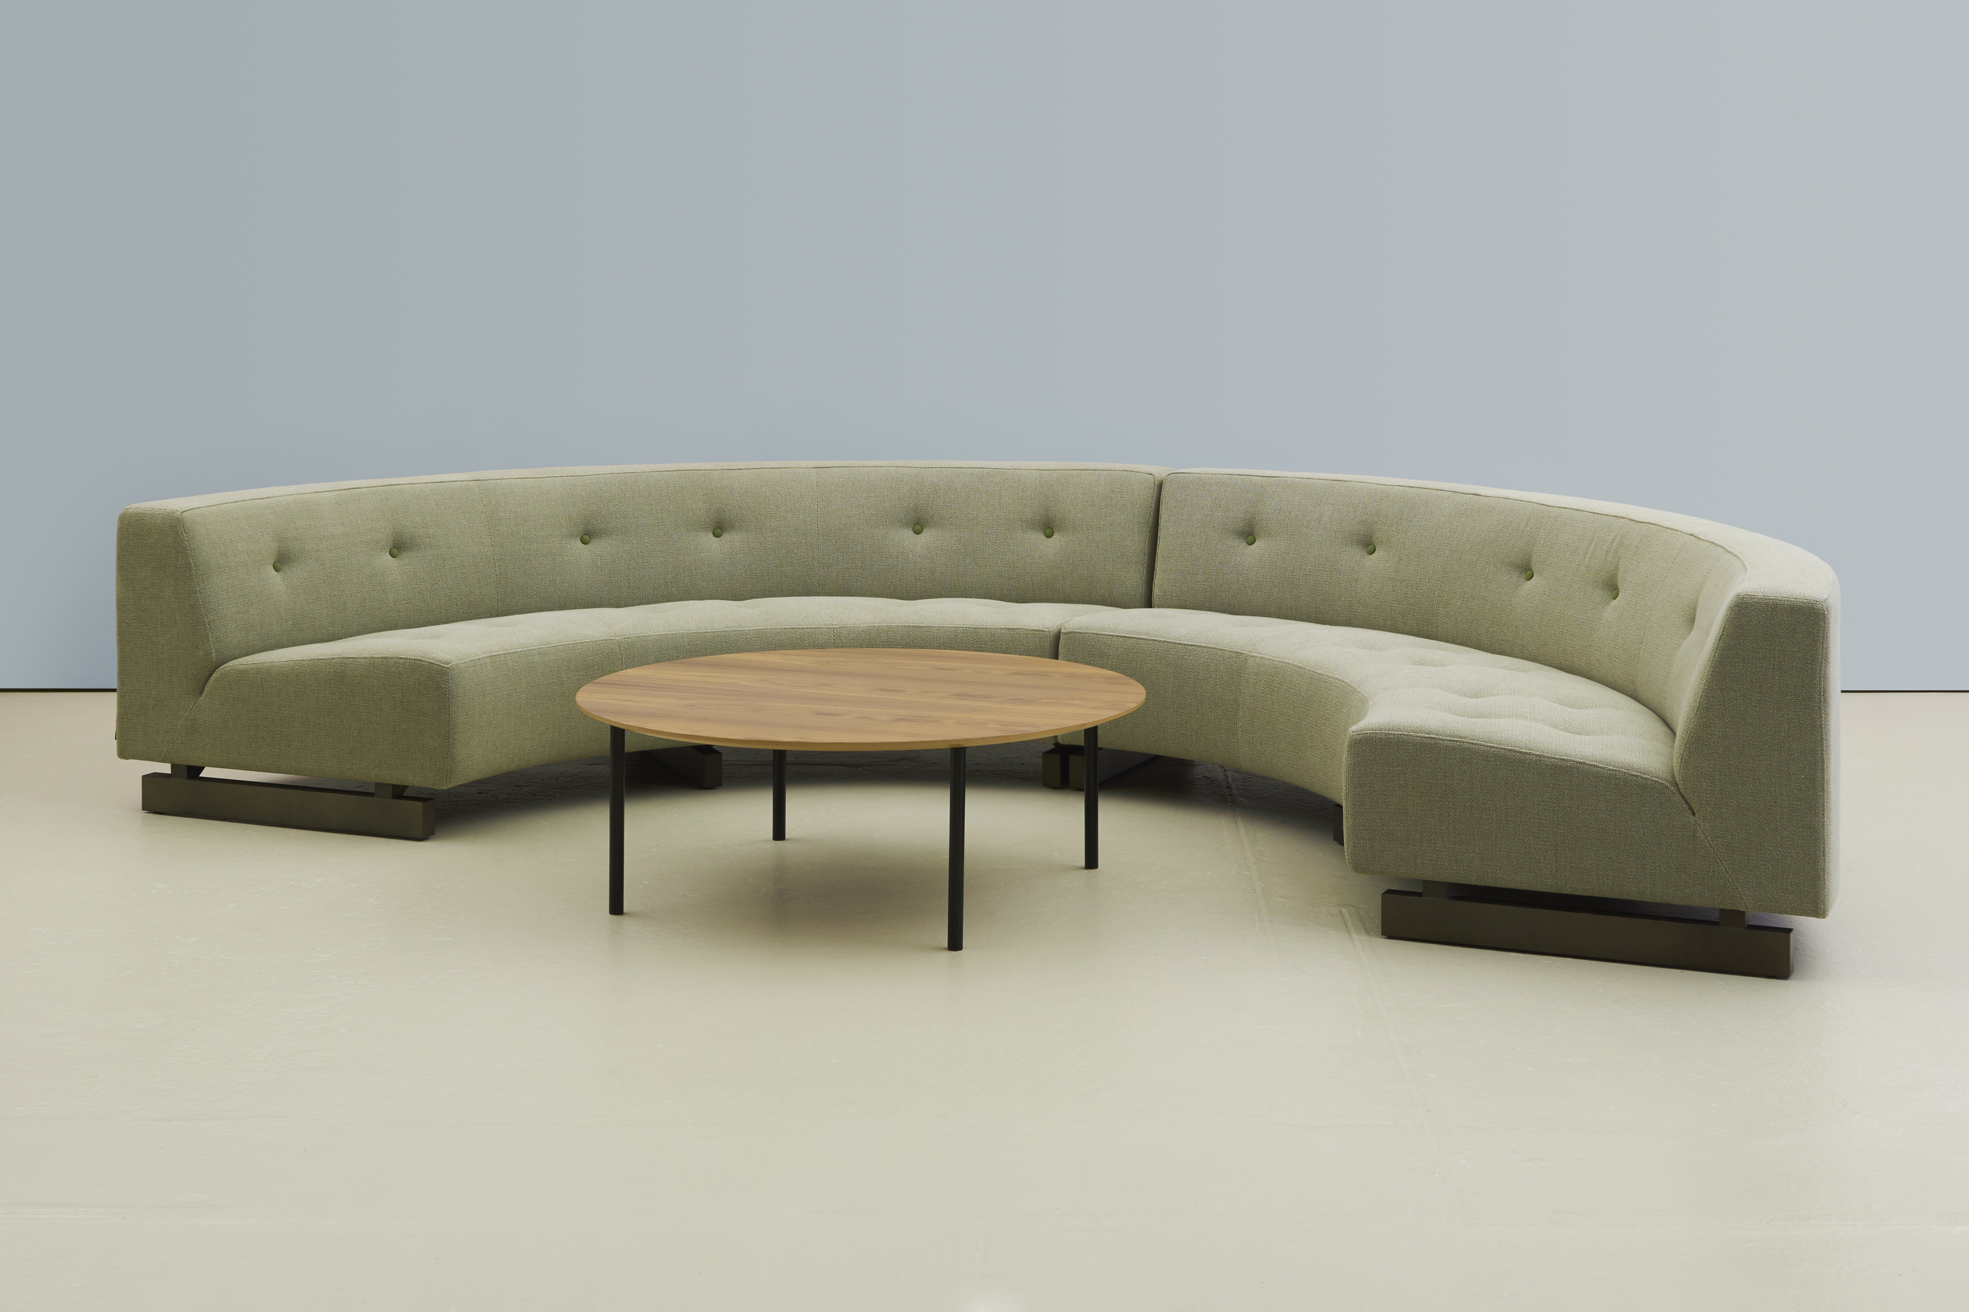 hm46v1 curved sofa with hm18z table (1) (low res).jpg